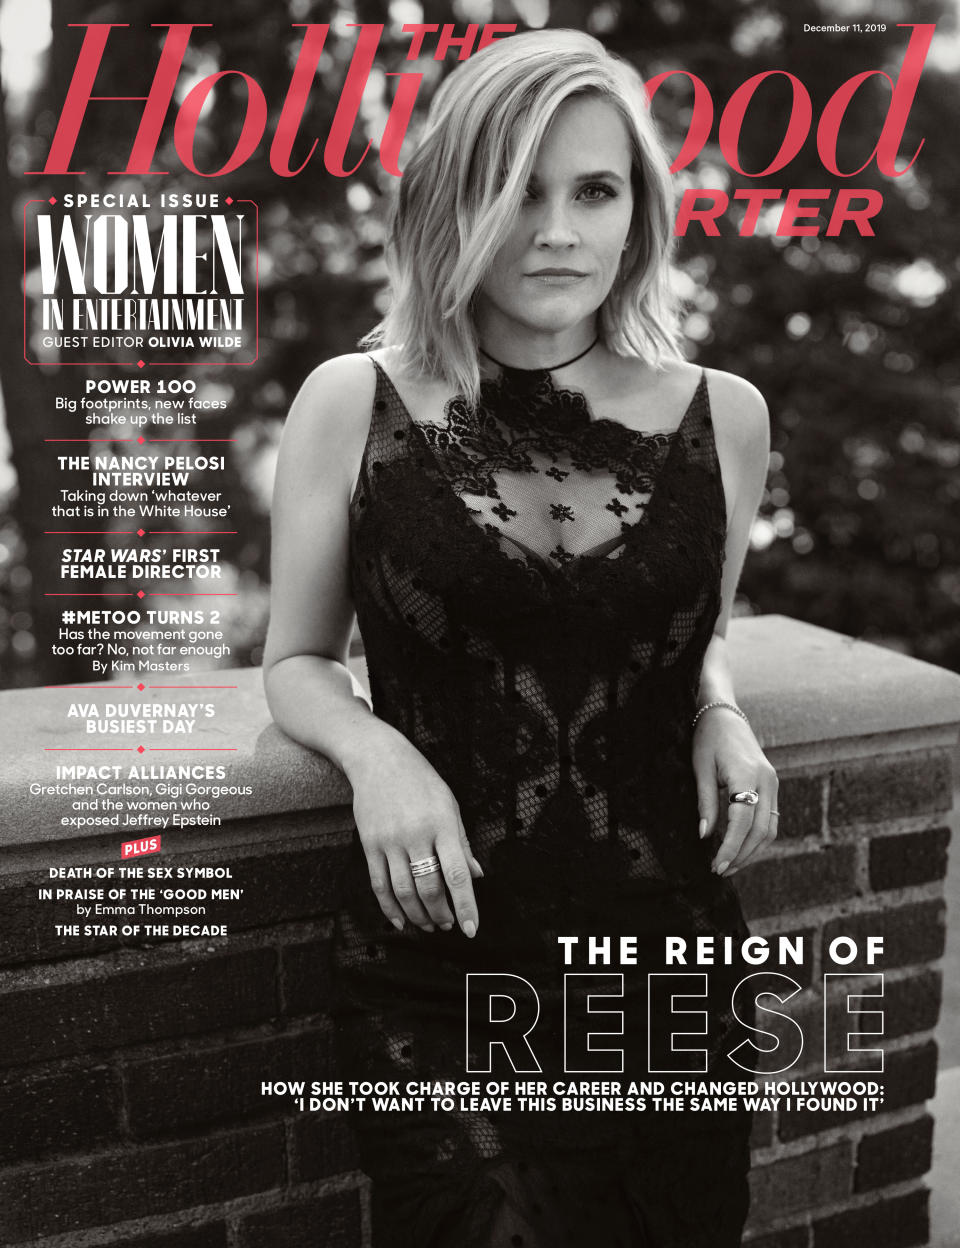 Reese Witherspoon covers The Hollywood Reporter's Women in Entertainment issue. (Photo: The Hollywood Reporter)